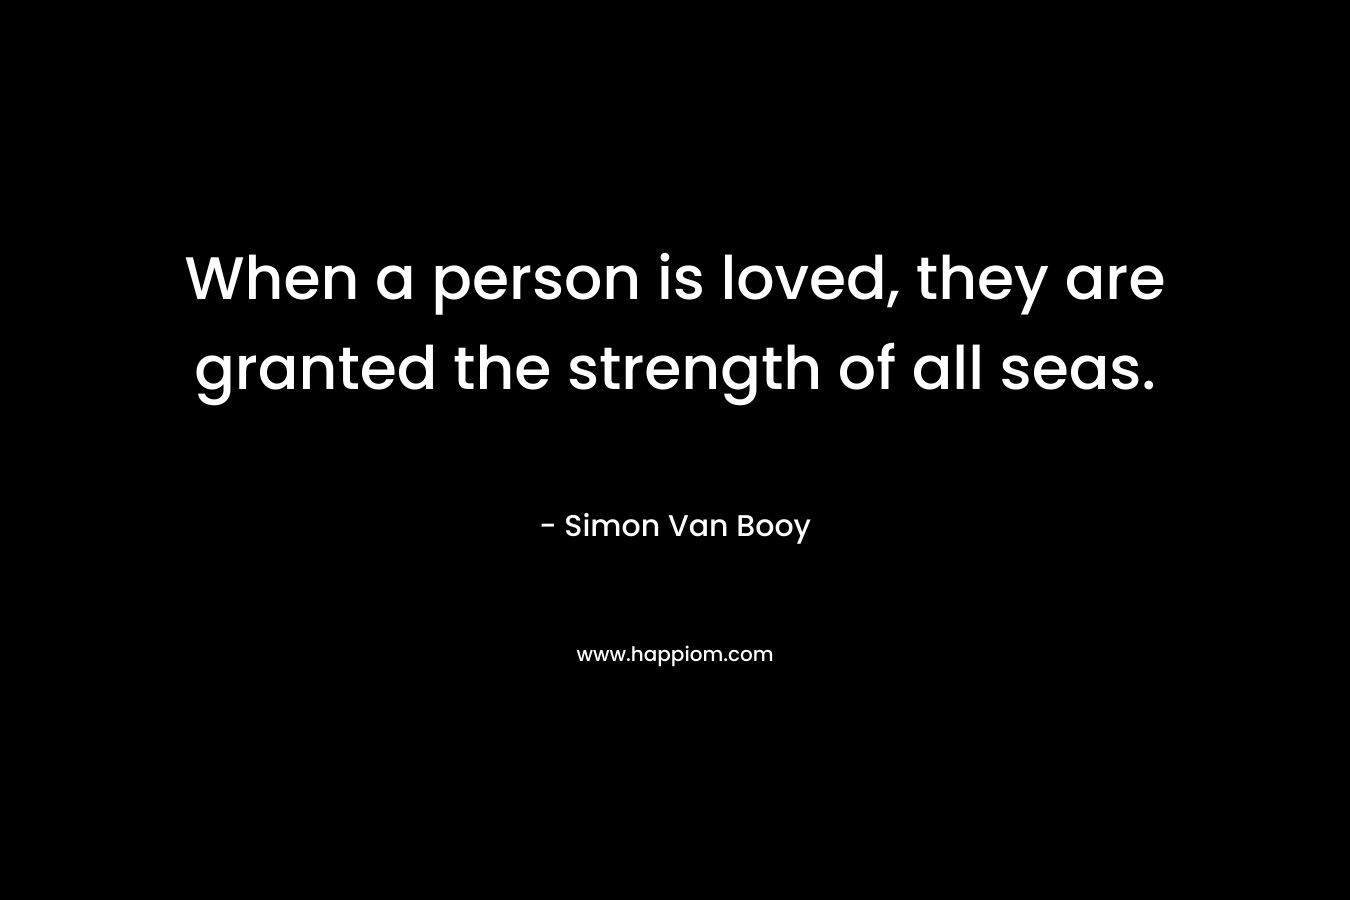 When a person is loved, they are granted the strength of all seas. – Simon Van Booy